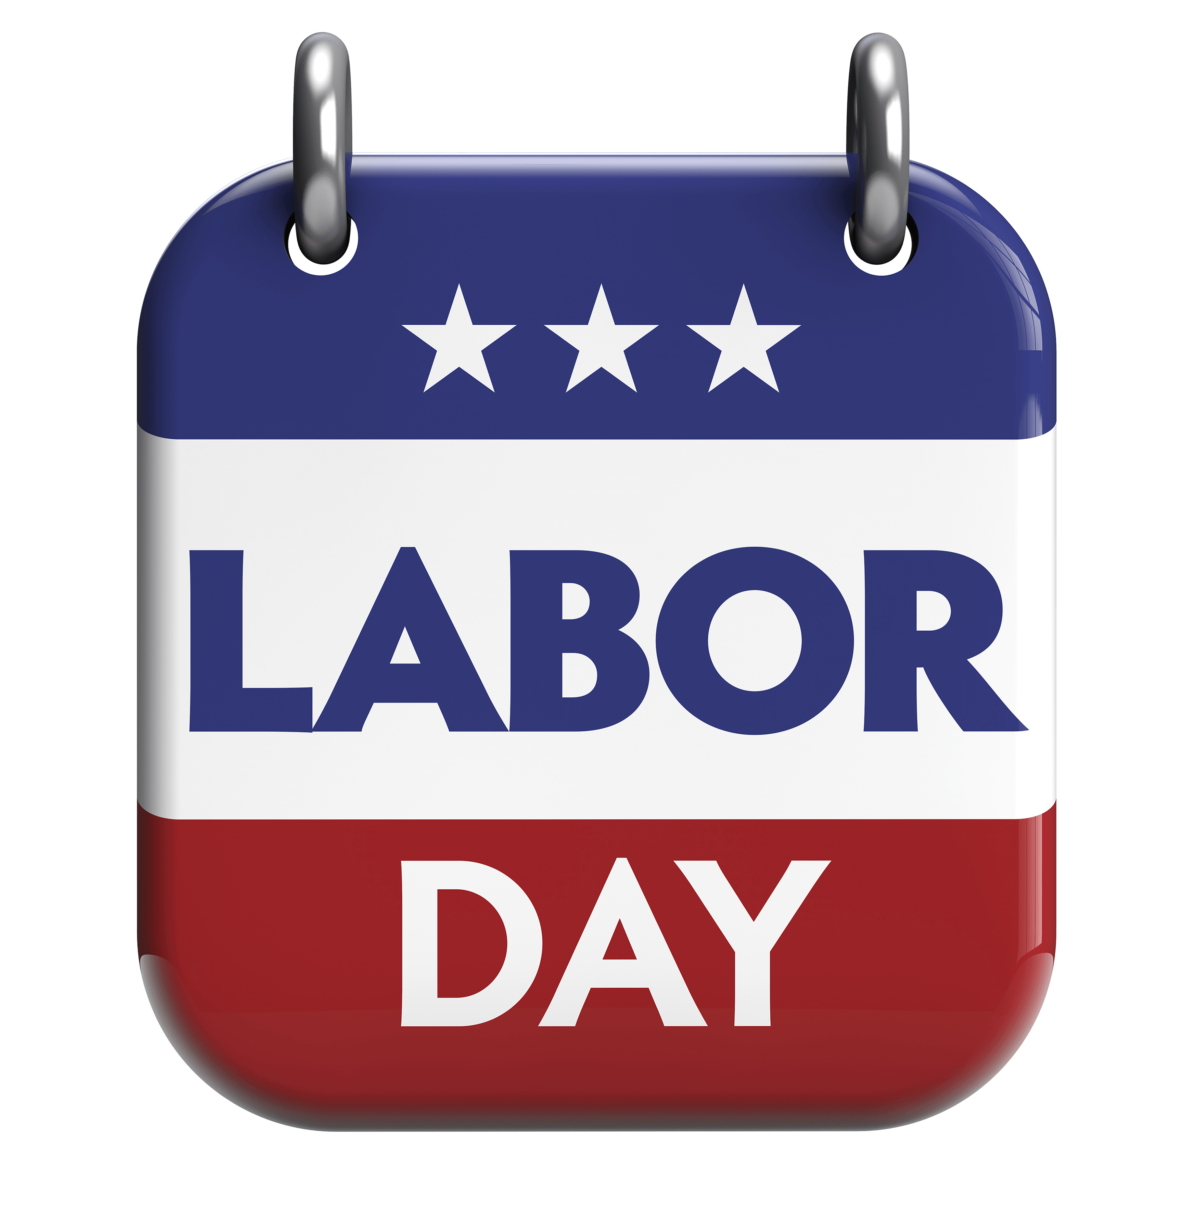 Labor Day Images, Labor Day Wallpapers For Free Download, GLaureL …